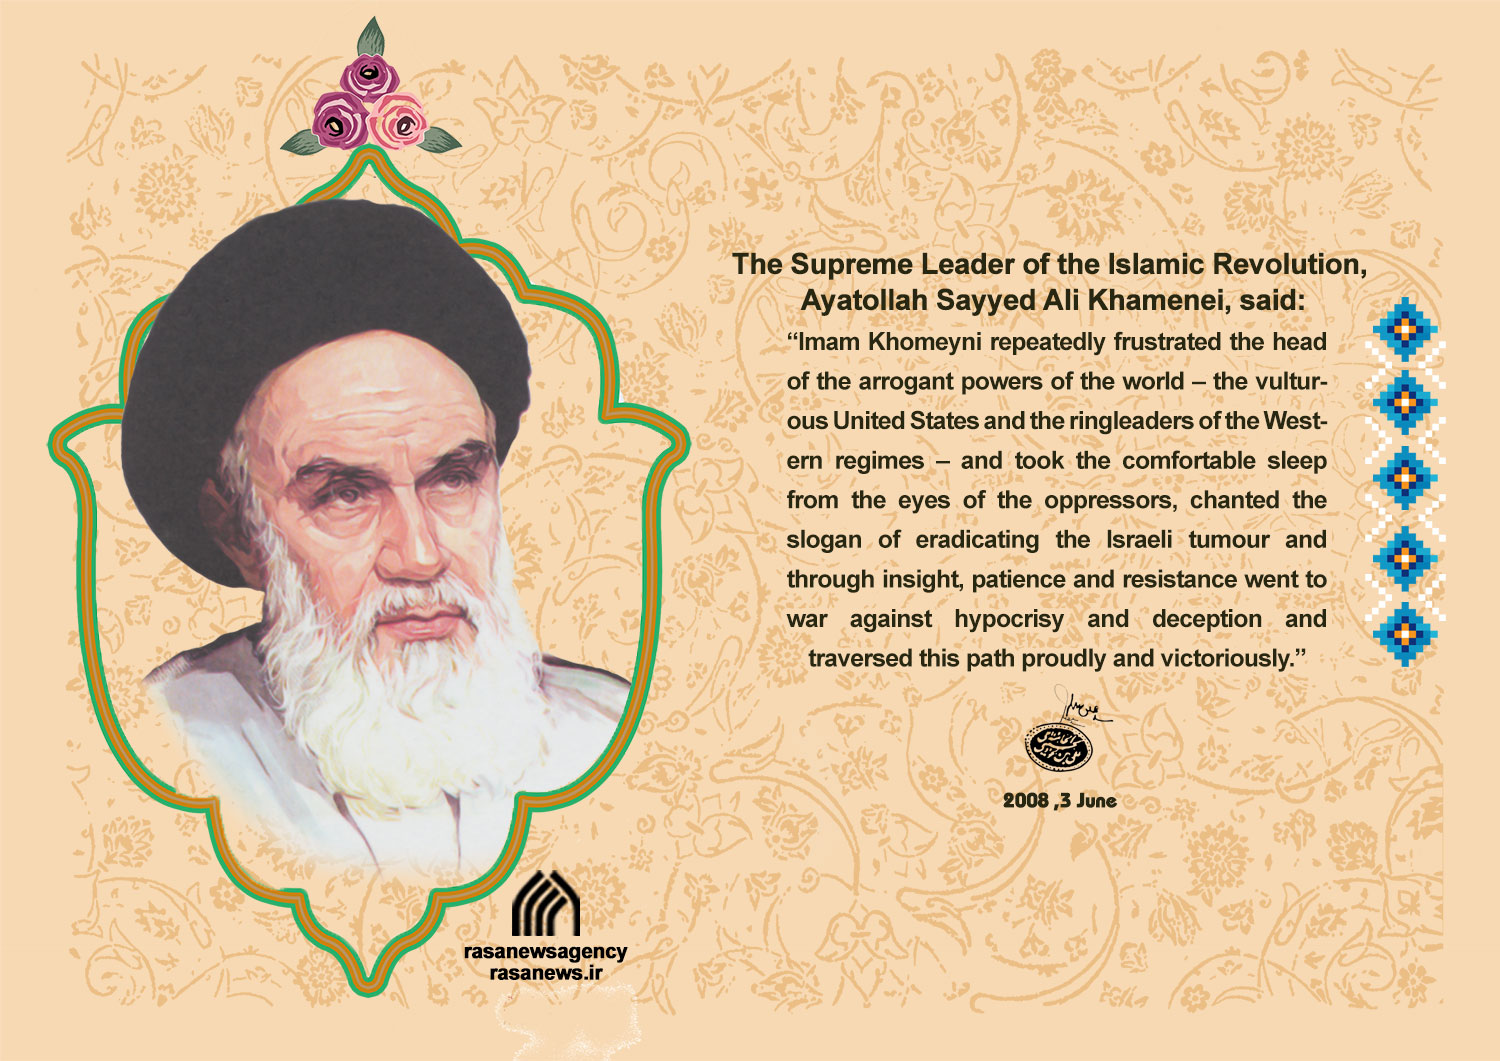 Imam Khomeyni repeatedly frustrated the head of the arrogant powers of the world